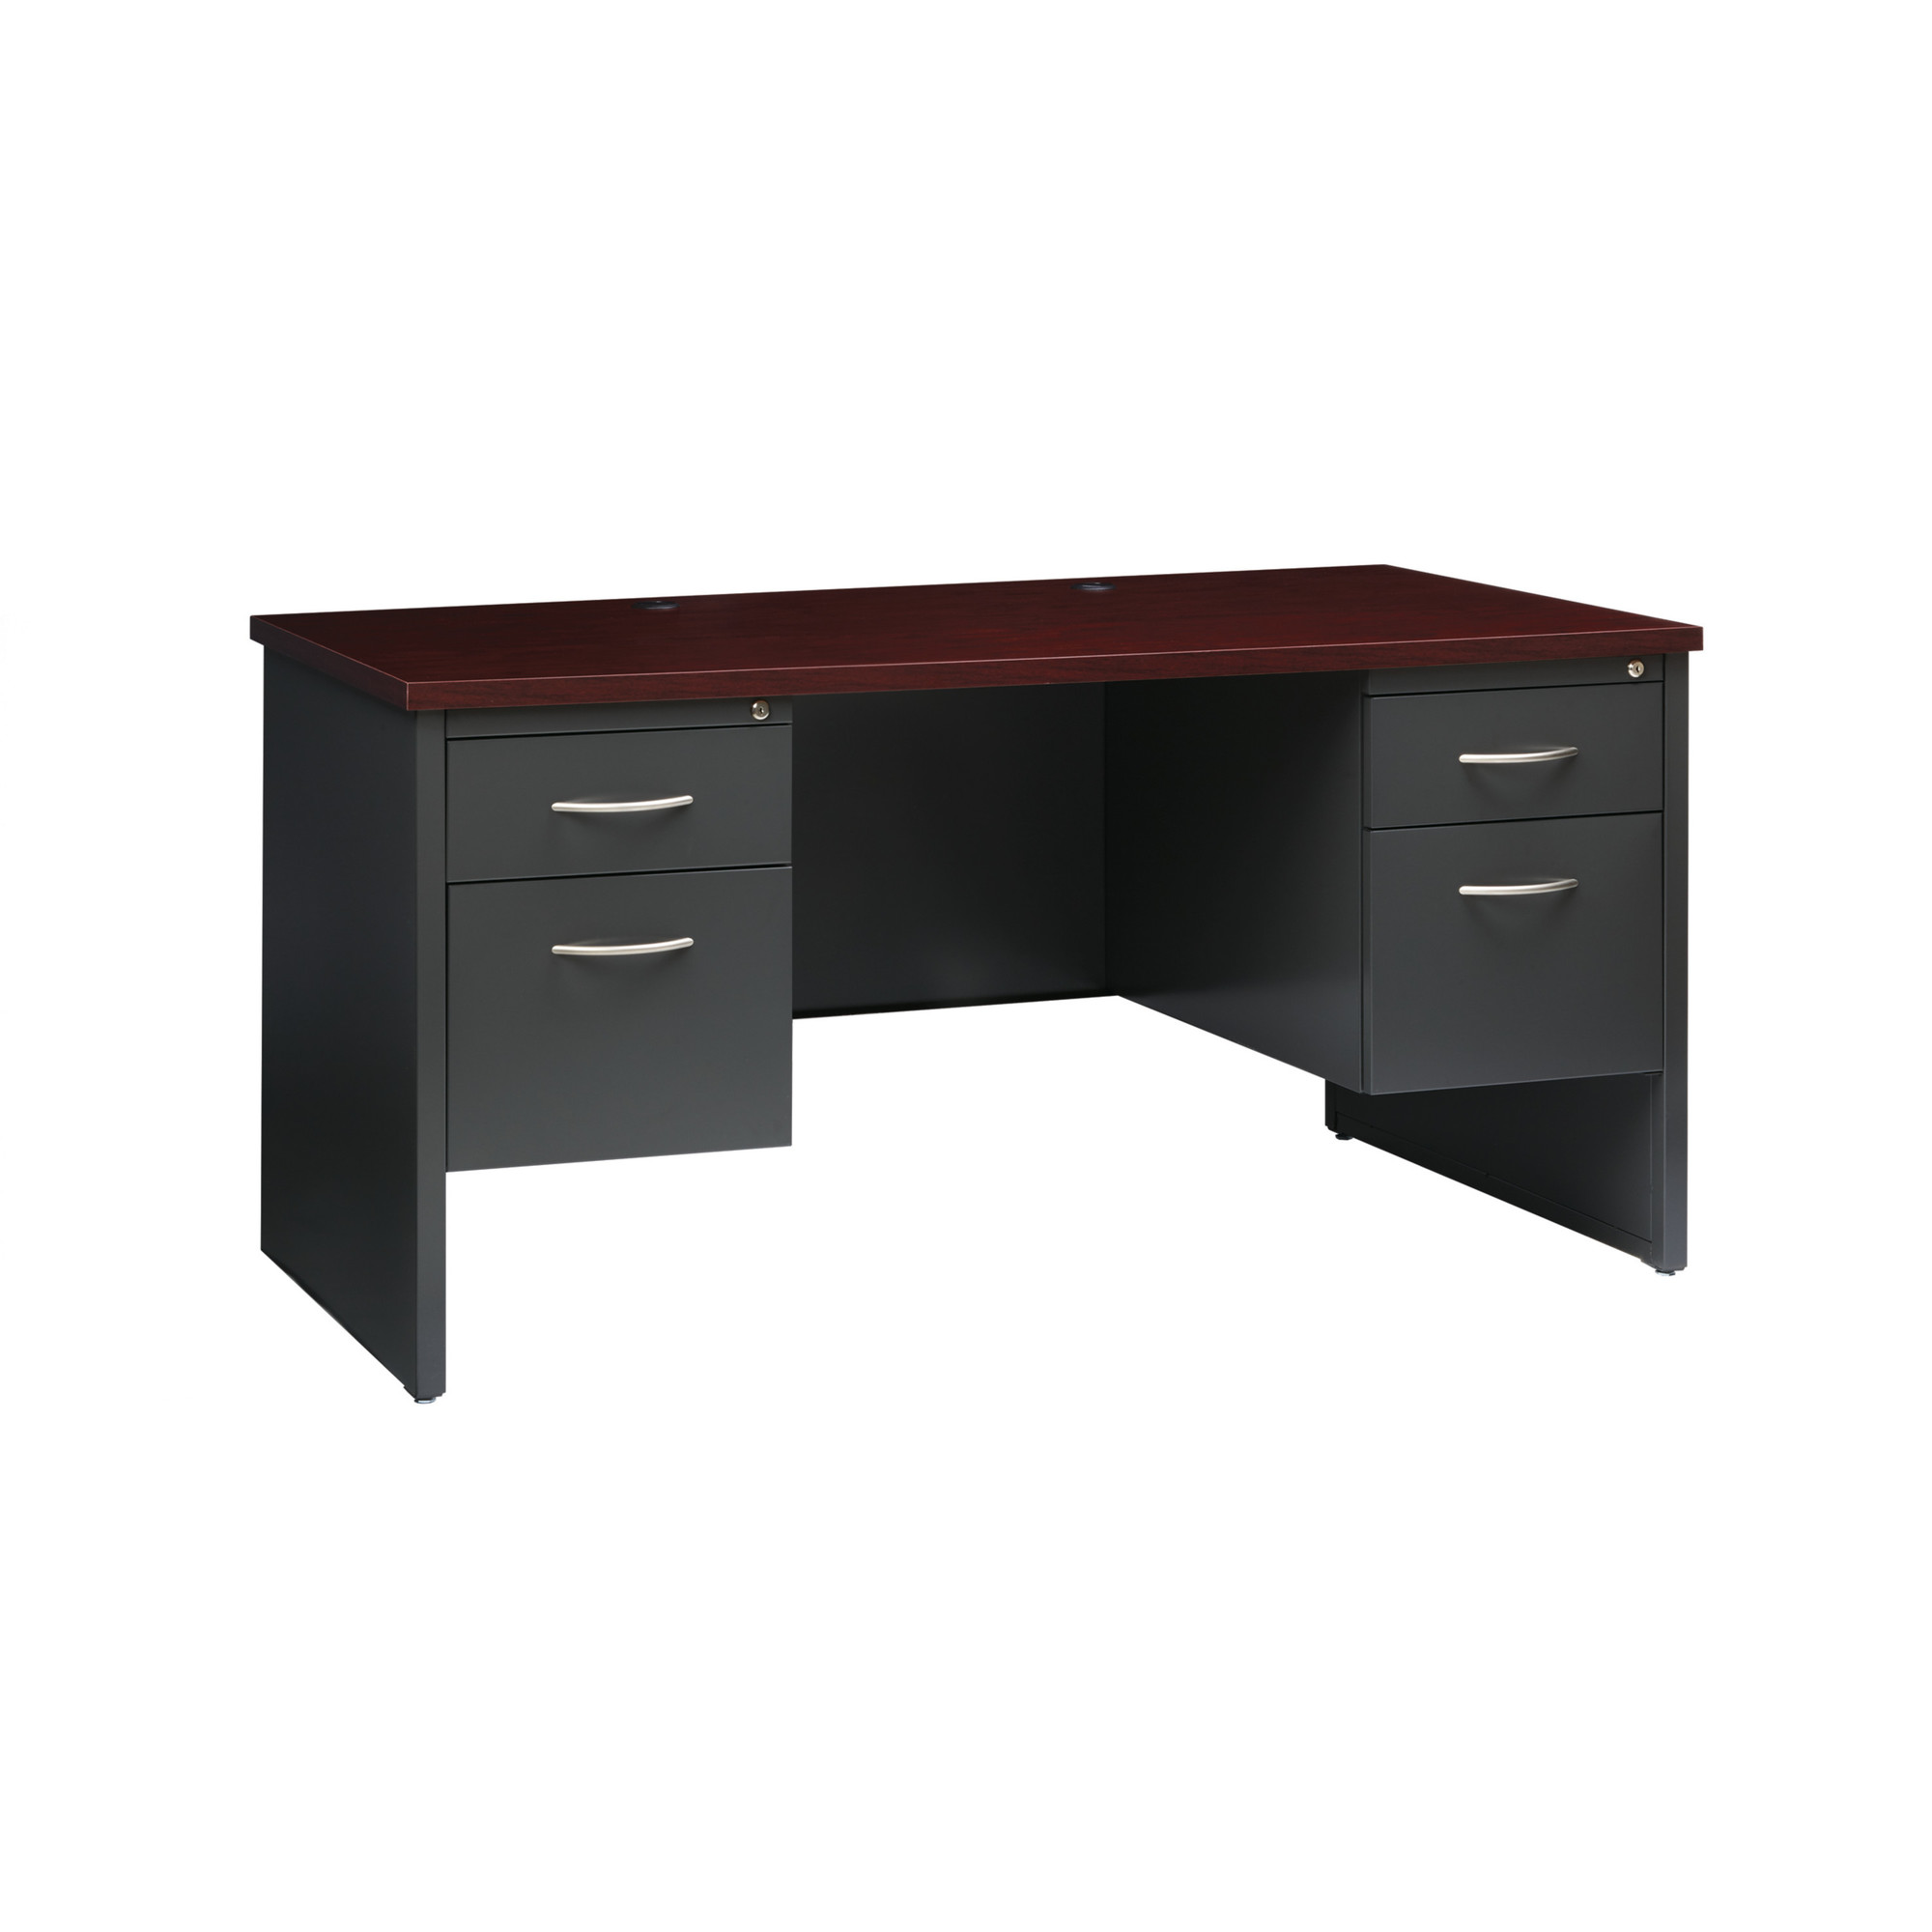 Hirsh Industries, Executive Modular Double Ped File Office Desk, Width 60 in, Height 29.5 in, Depth 30 in, Model 20534